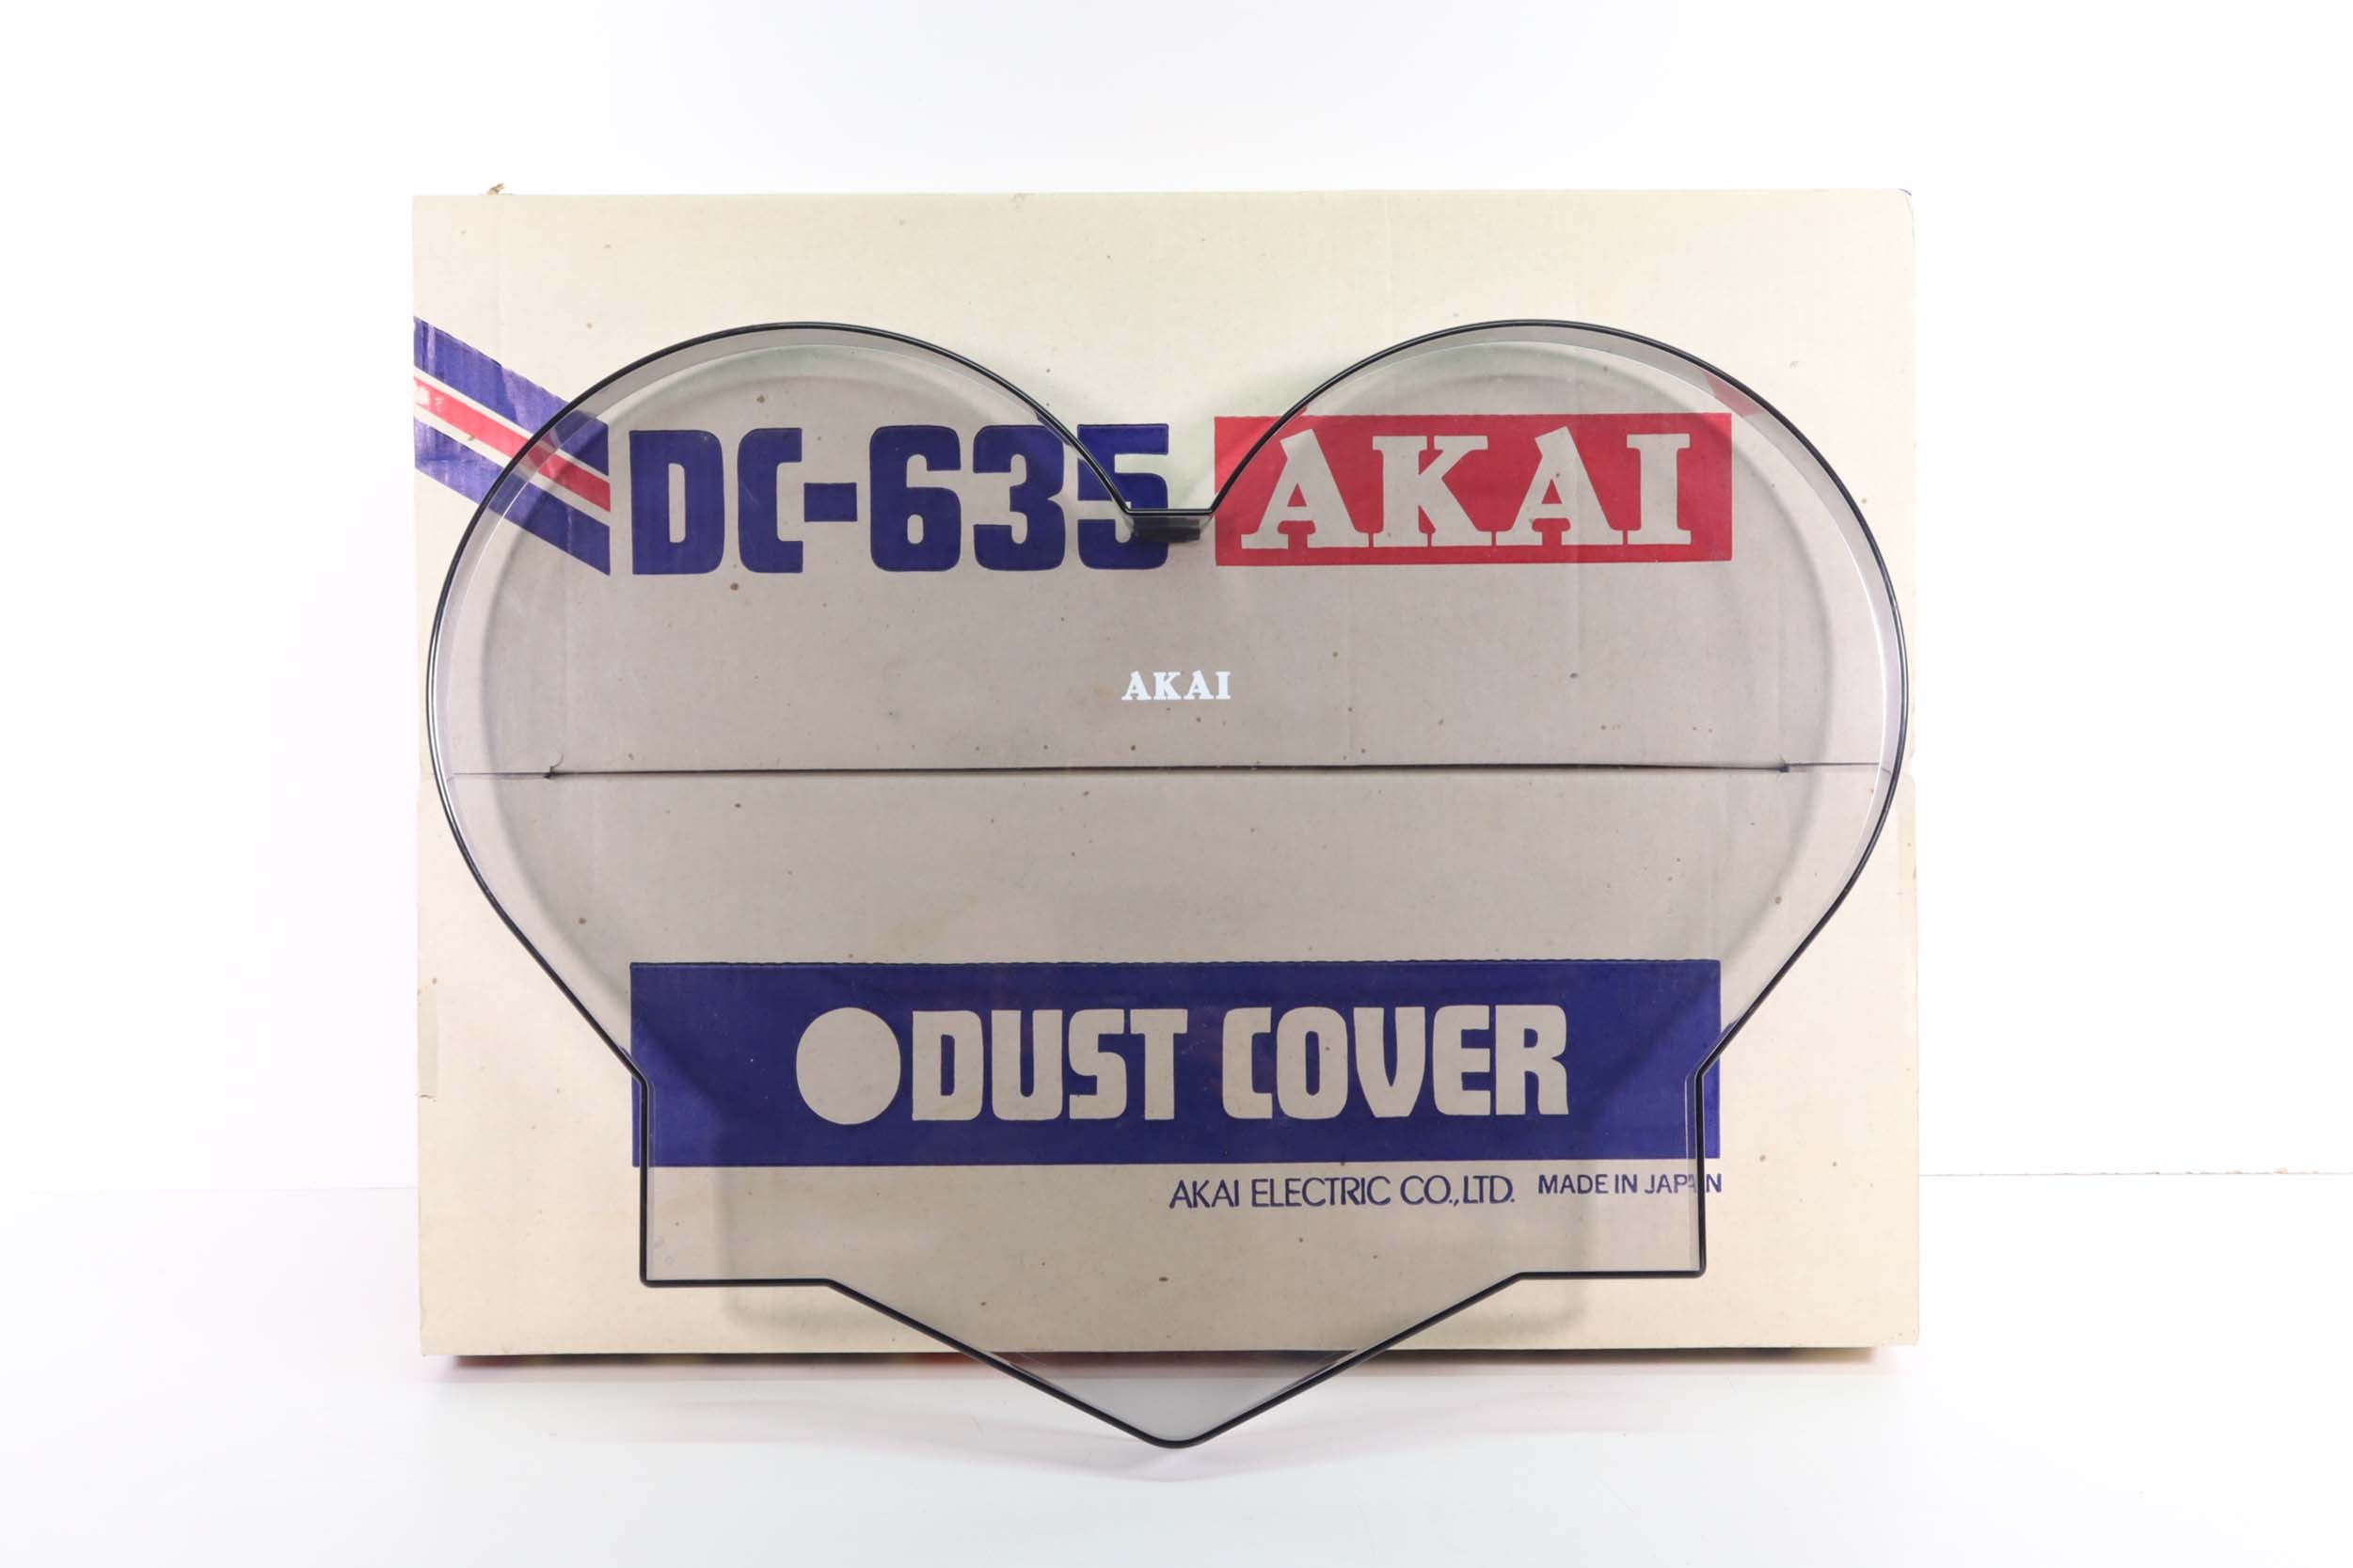 NEW DUST COVER for Akai GX-620 GX-625 etc Reel to Reel Recorders 